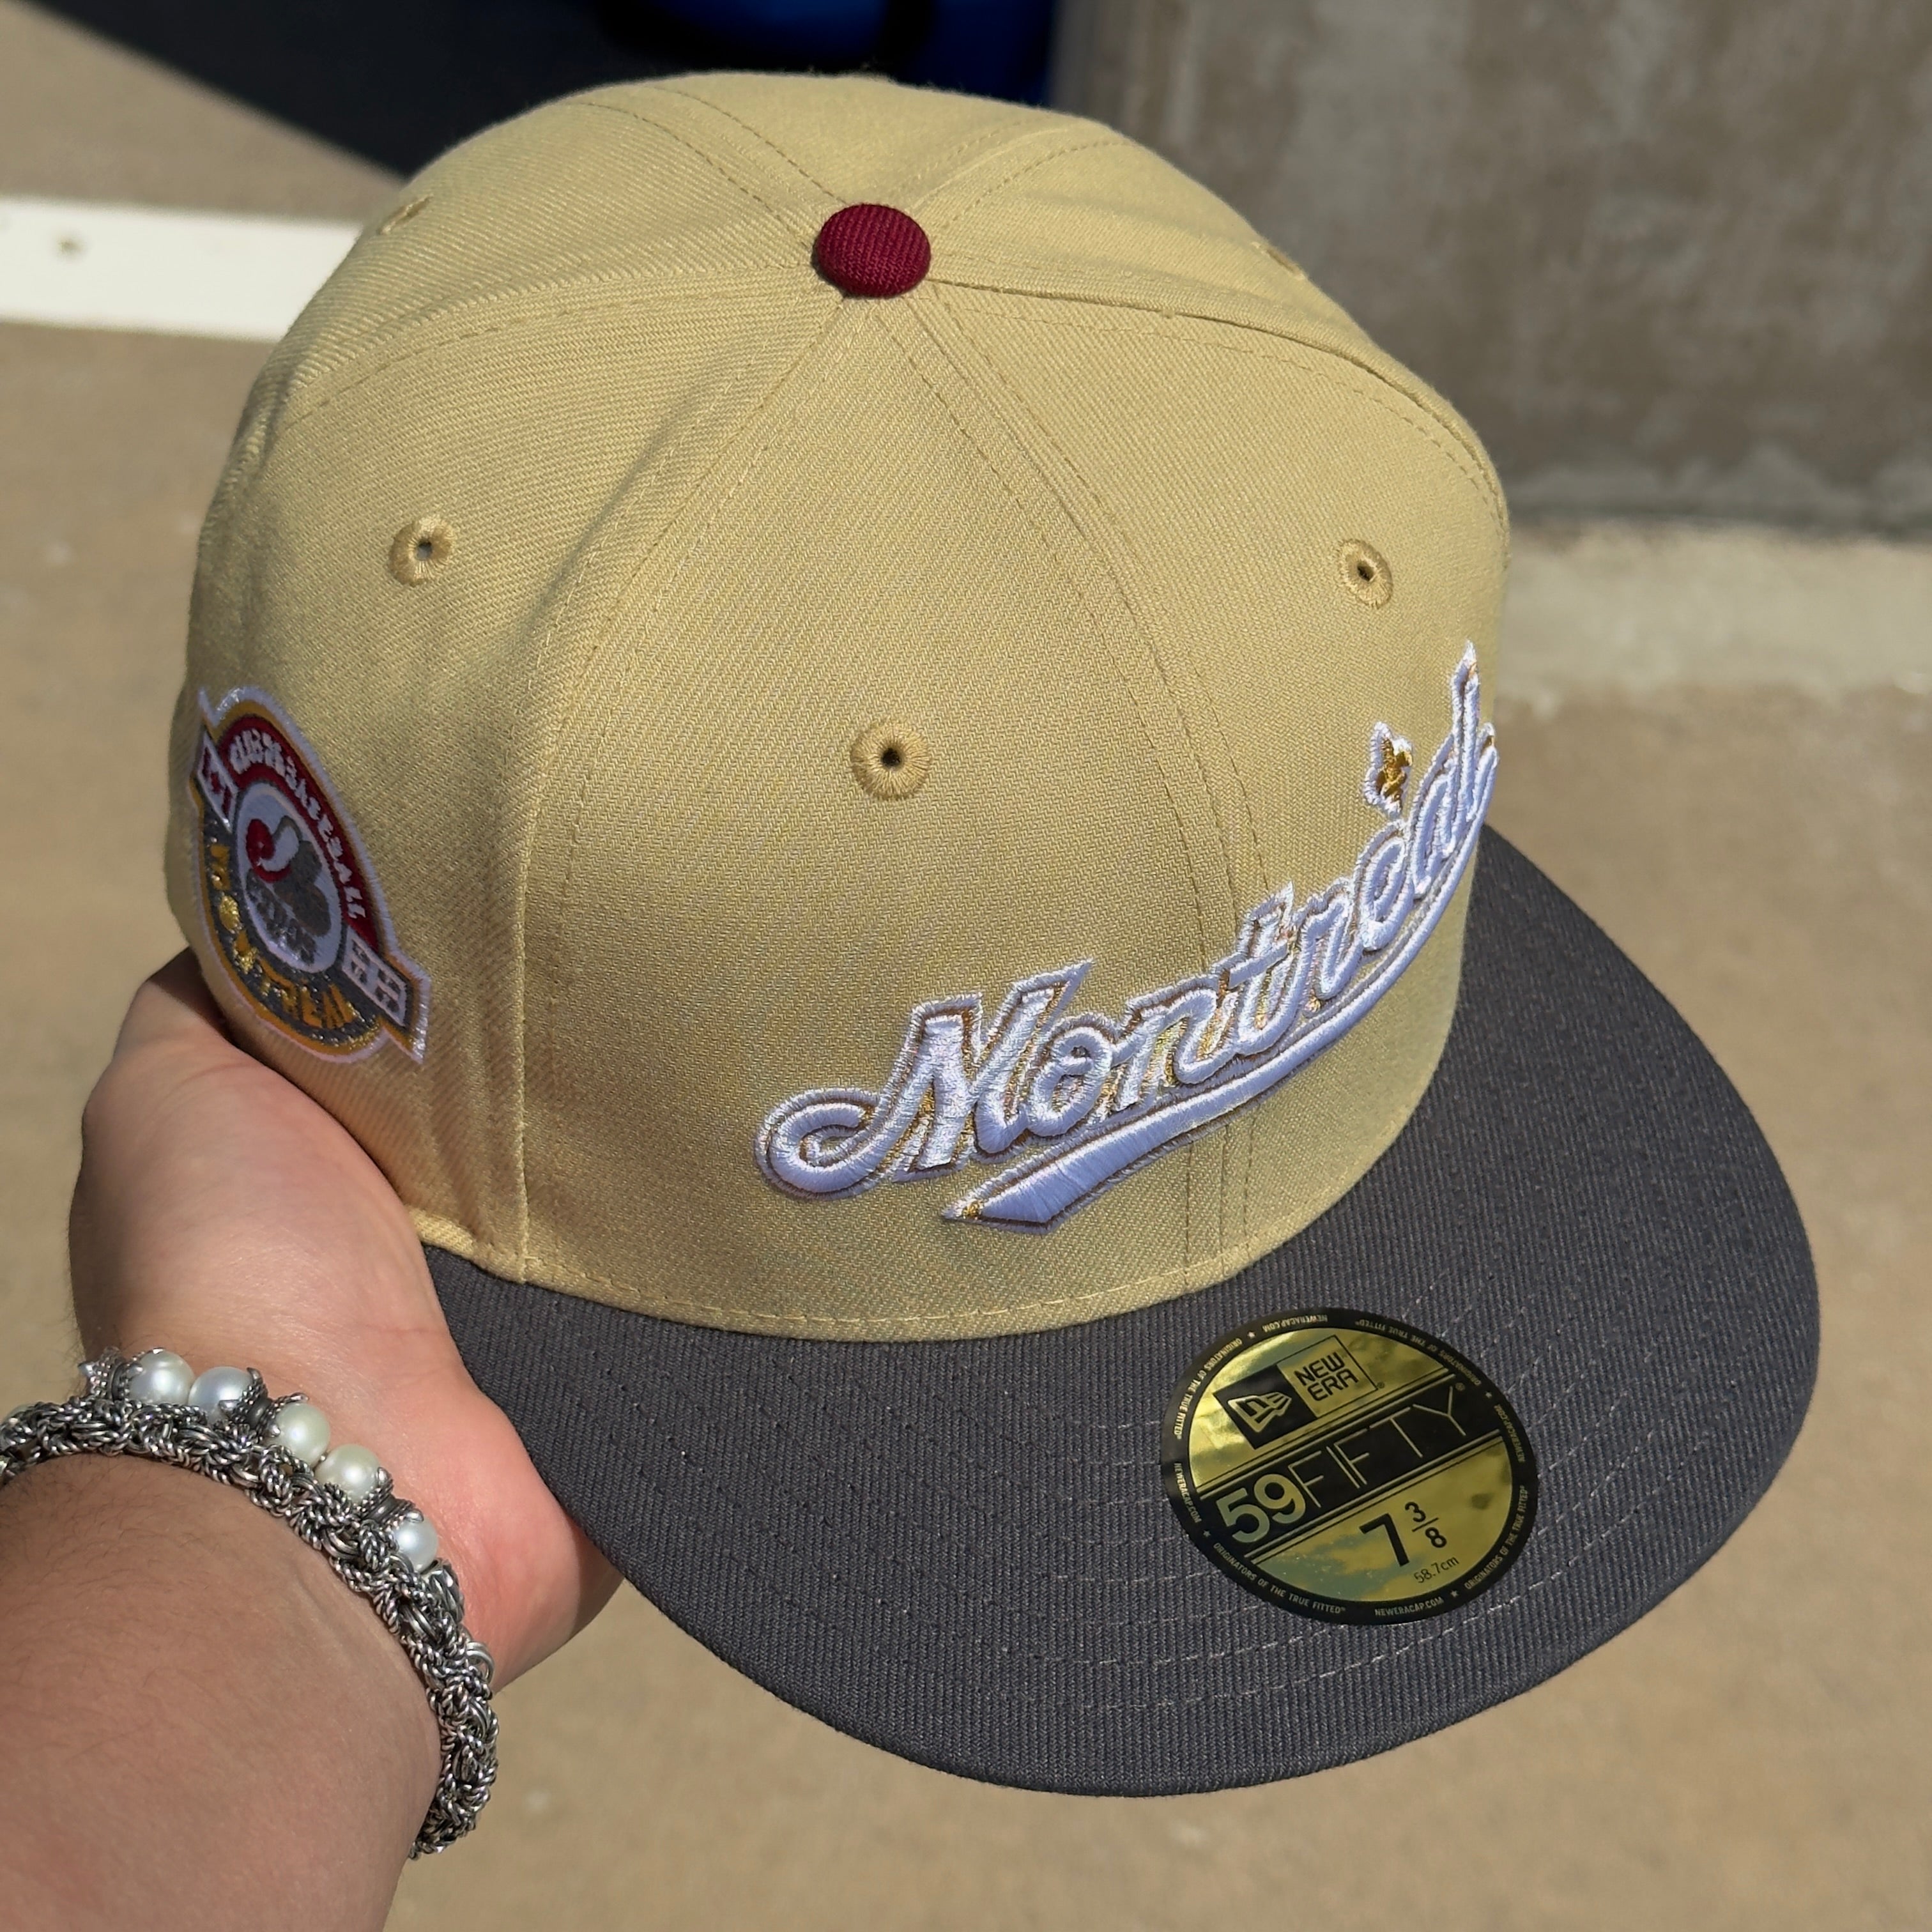 NEW Vegas Gold Montreal Expos Club Baseball Toronto 59fifty New Era Fitted Hat Cap